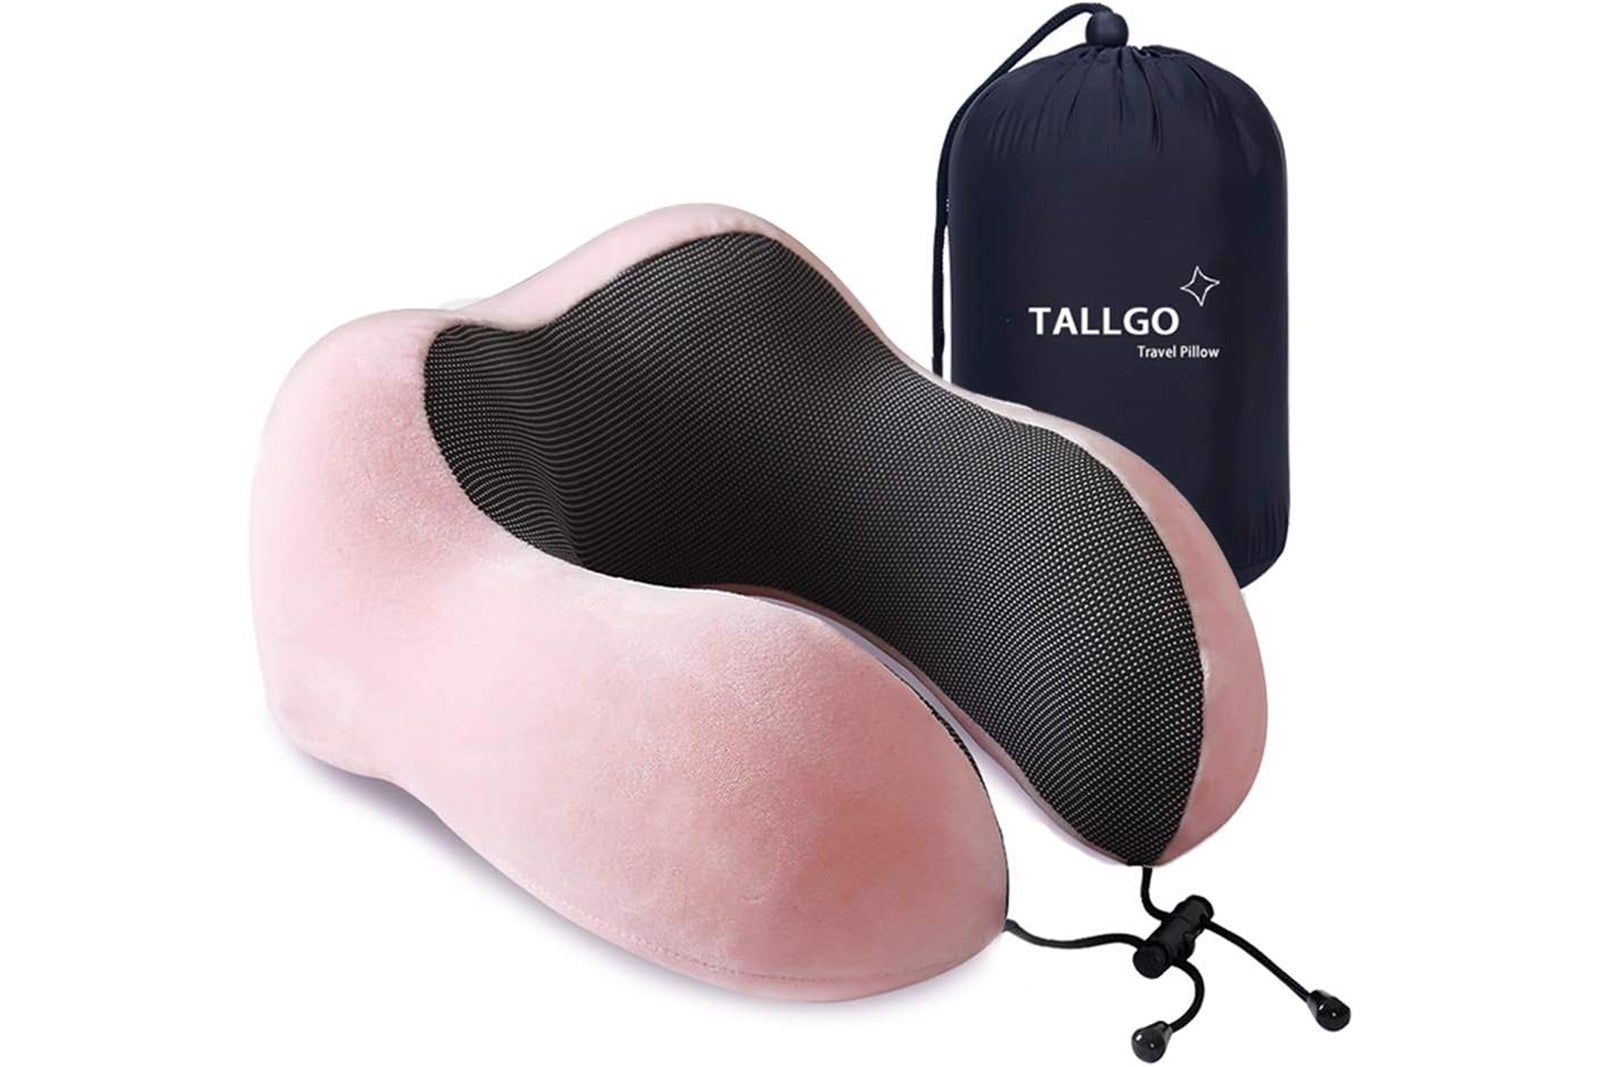 Amazon Prime Day deal: This memory foam travel pillow is currently on sale for less than $15